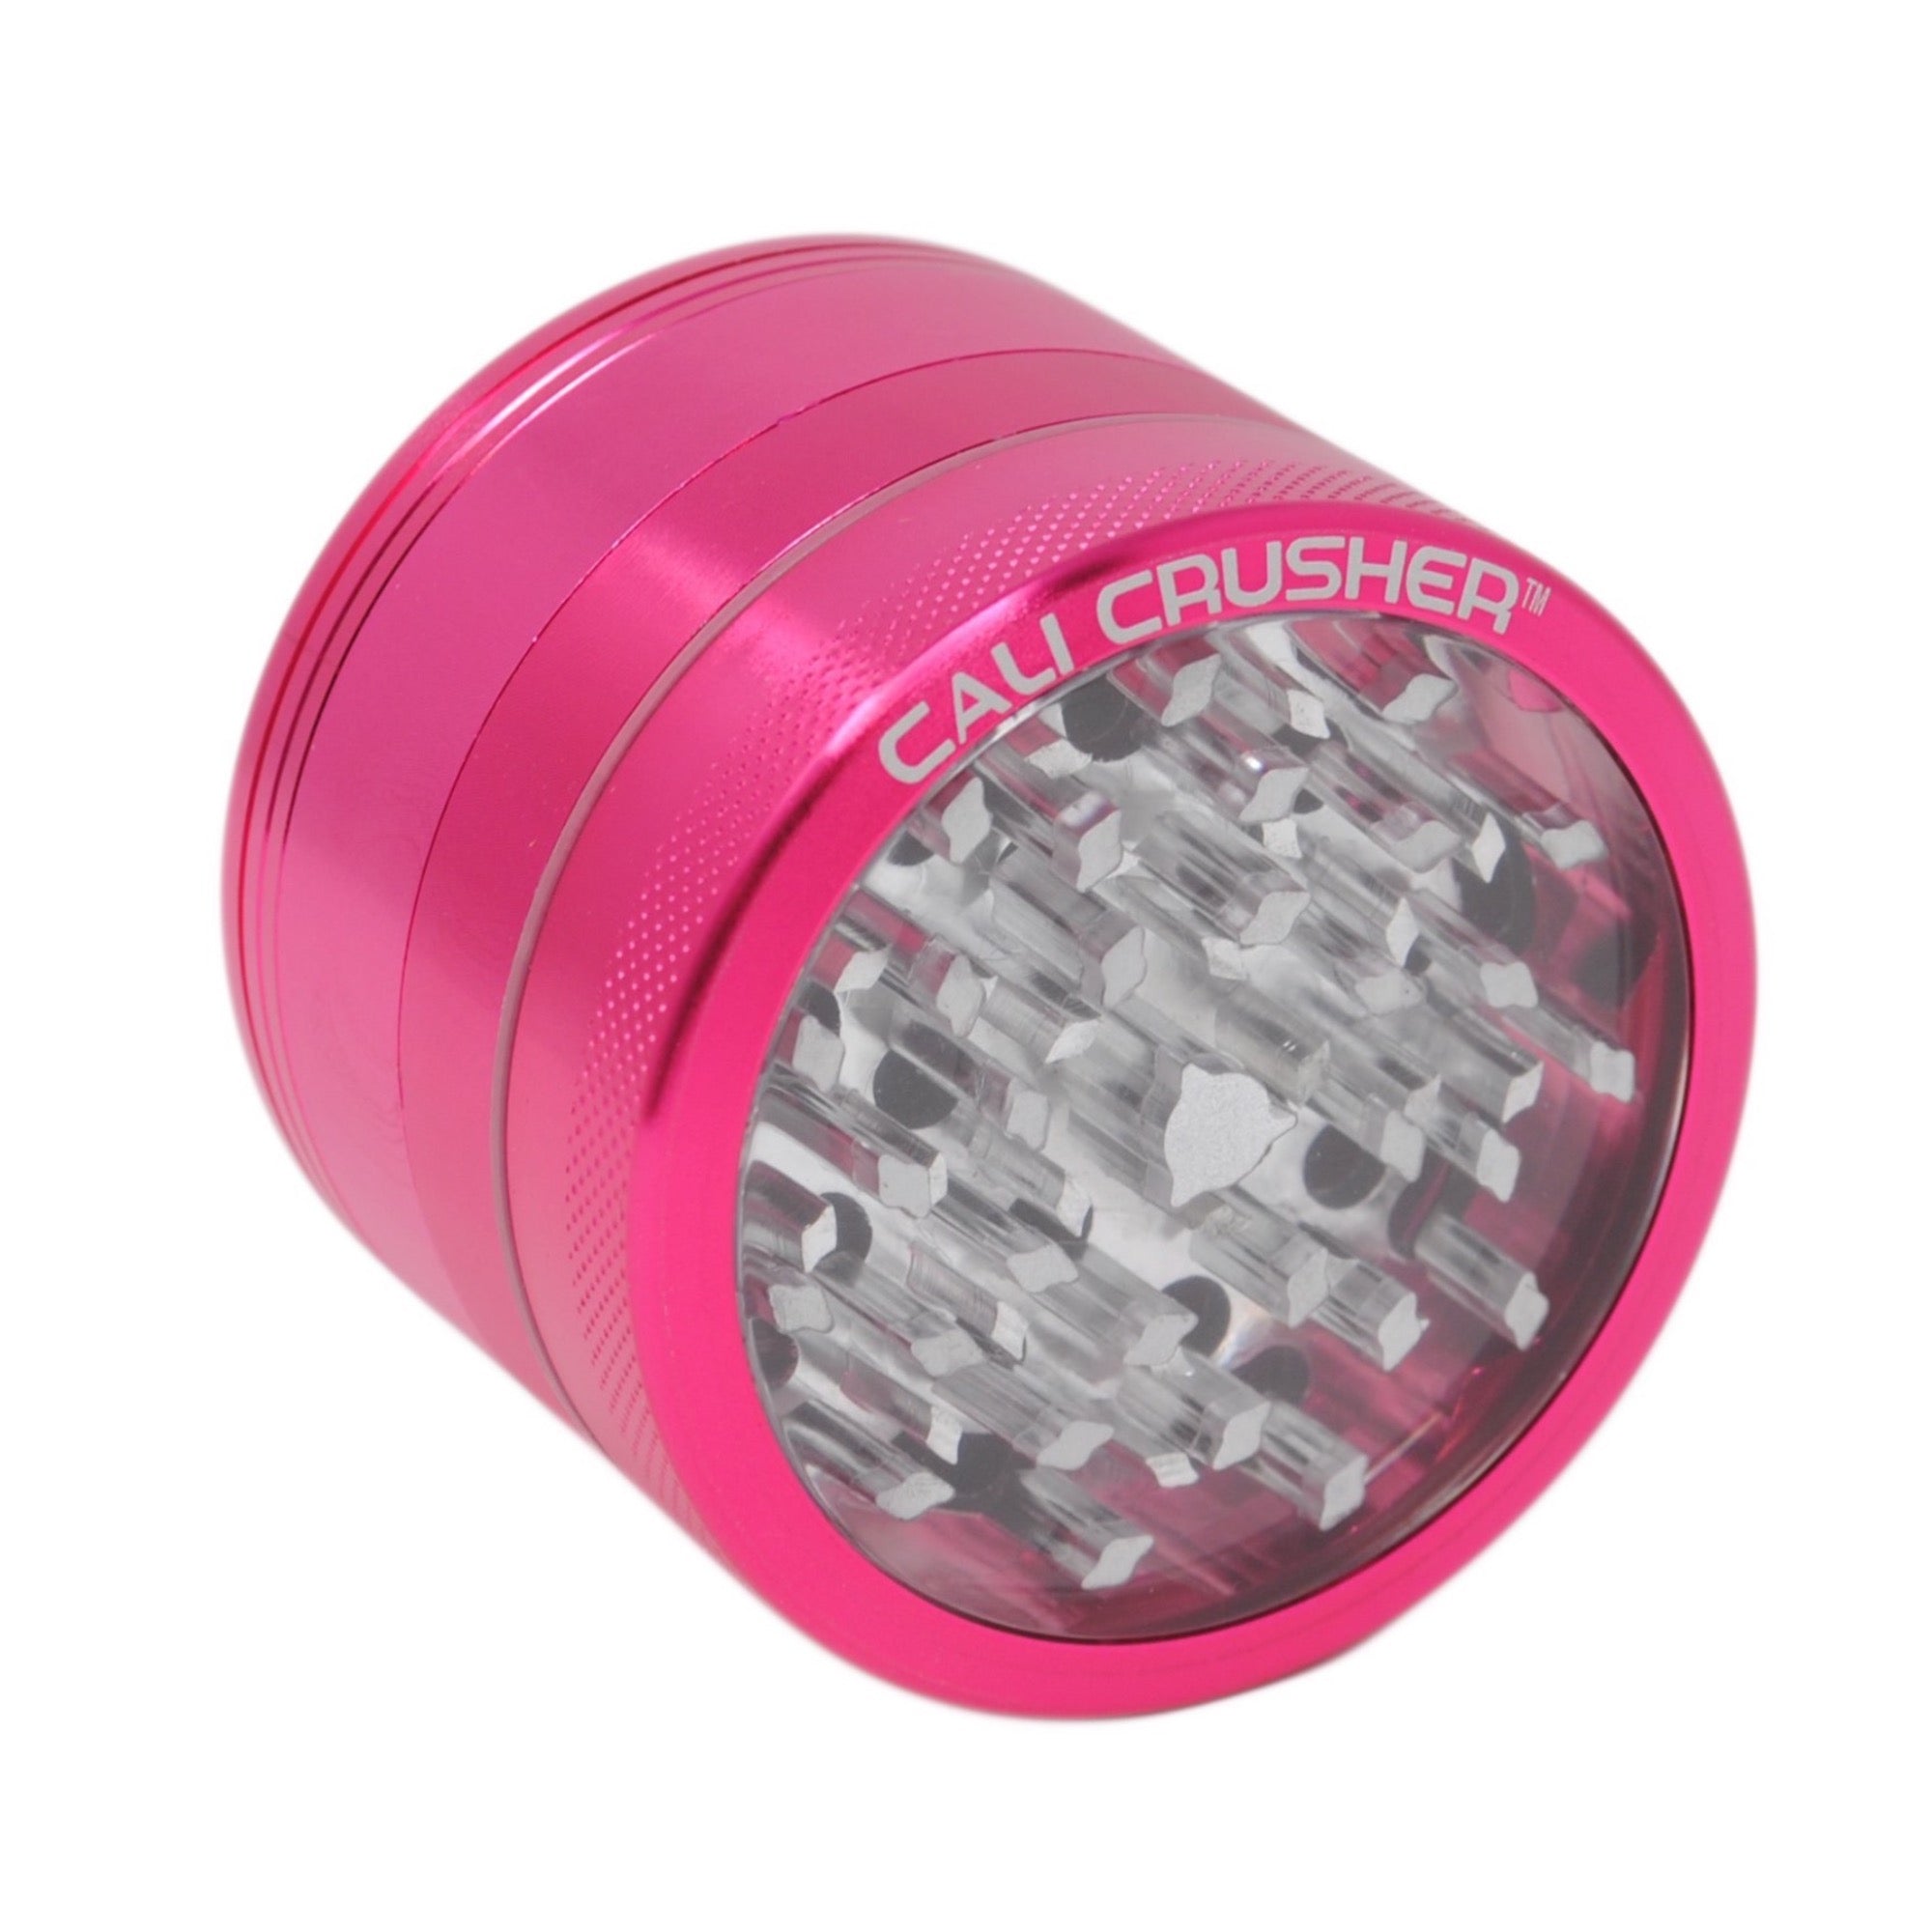 Cali Crusher®: 2" 4 Piece Clear Top Grinder - Pink